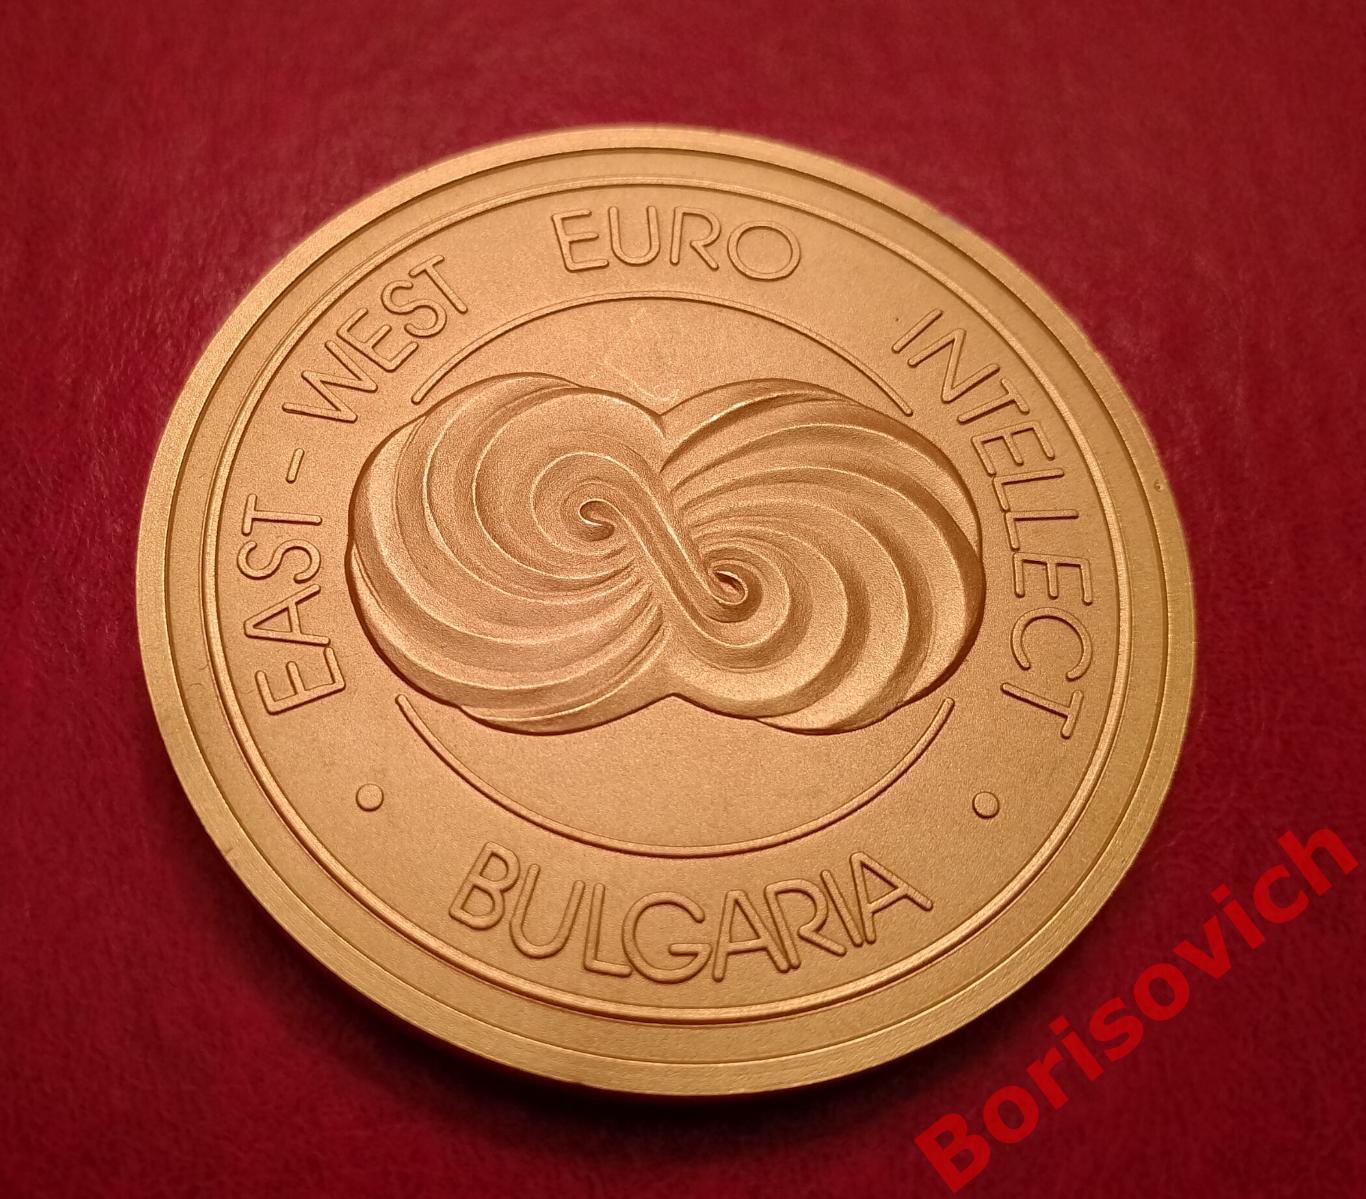 EAST - WEST EURO INTELLECT BULGARIA 1